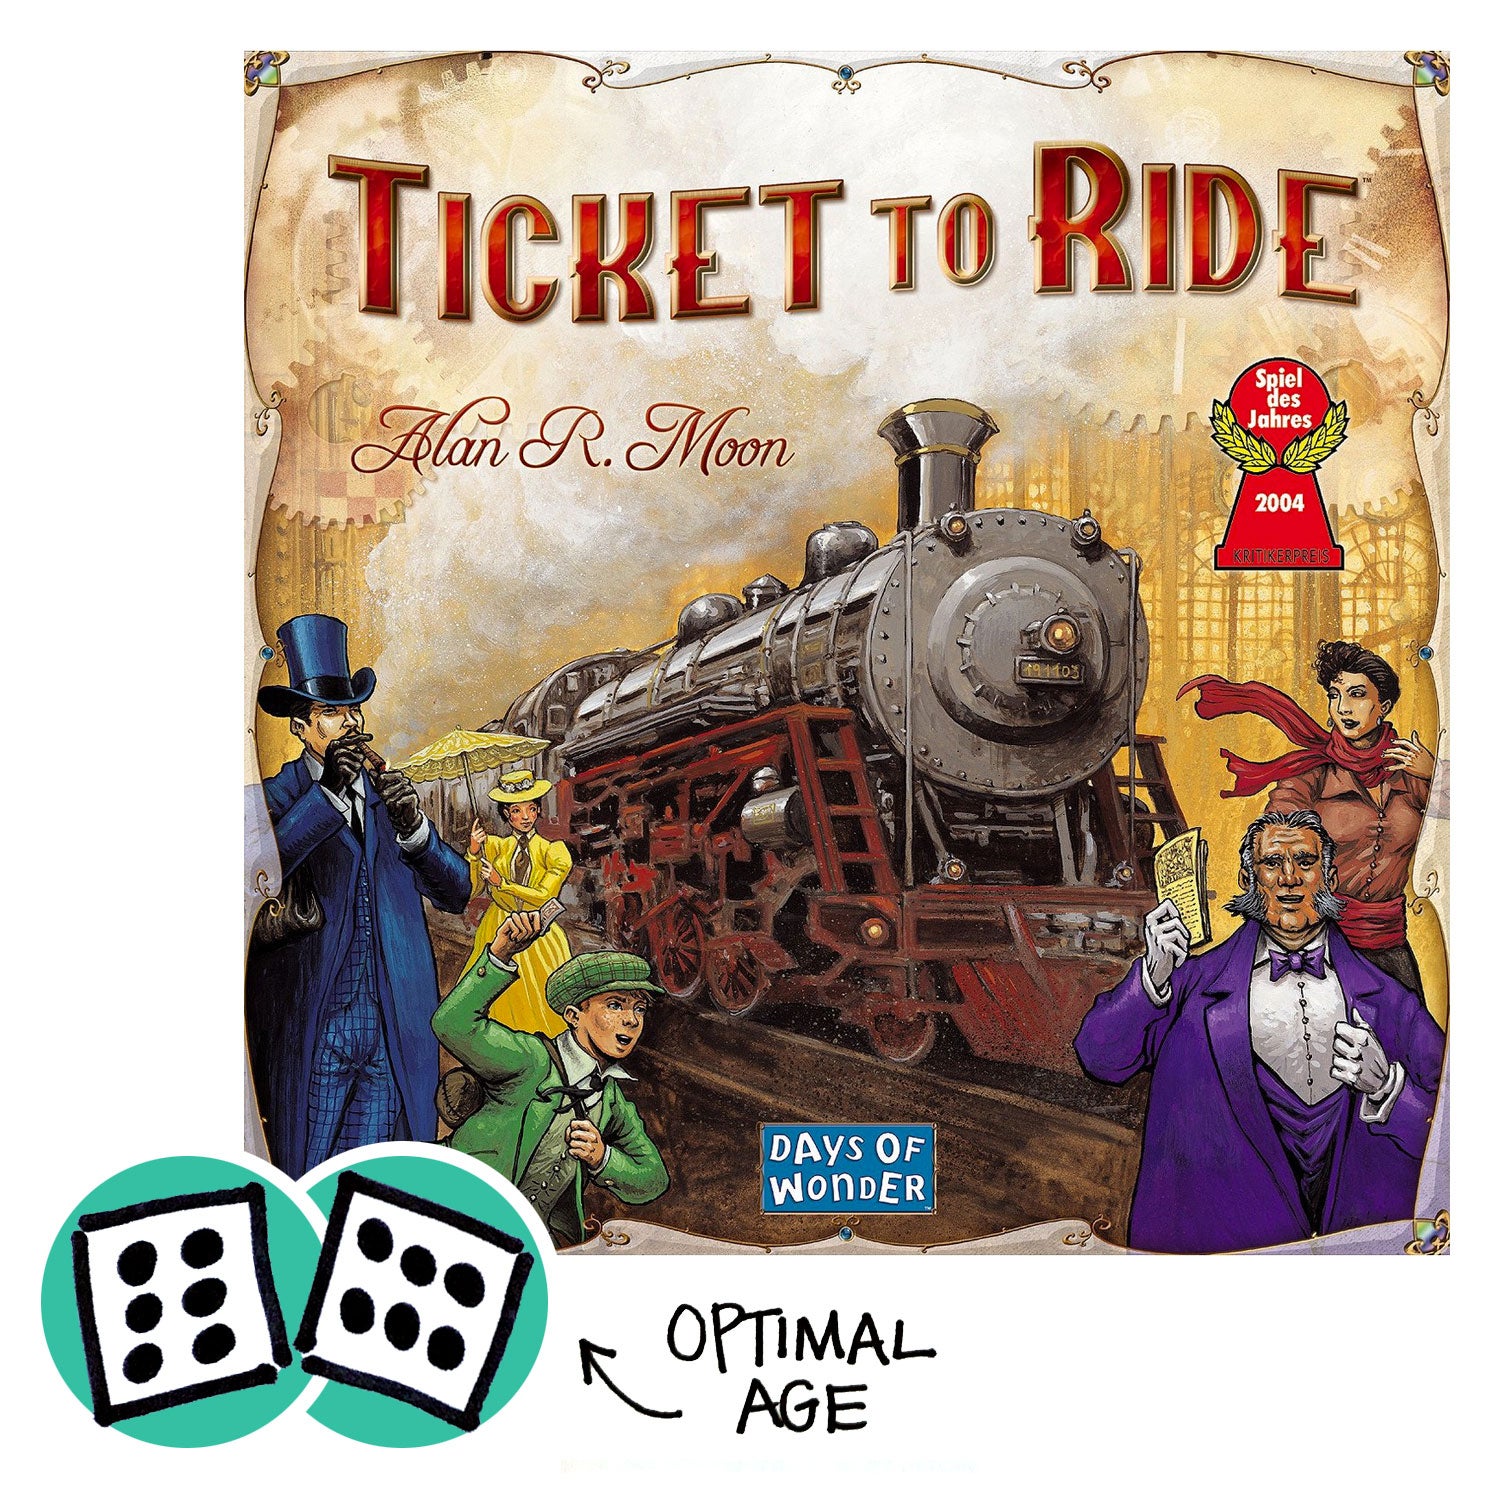 Ticket to Ride with dice showing optimal age